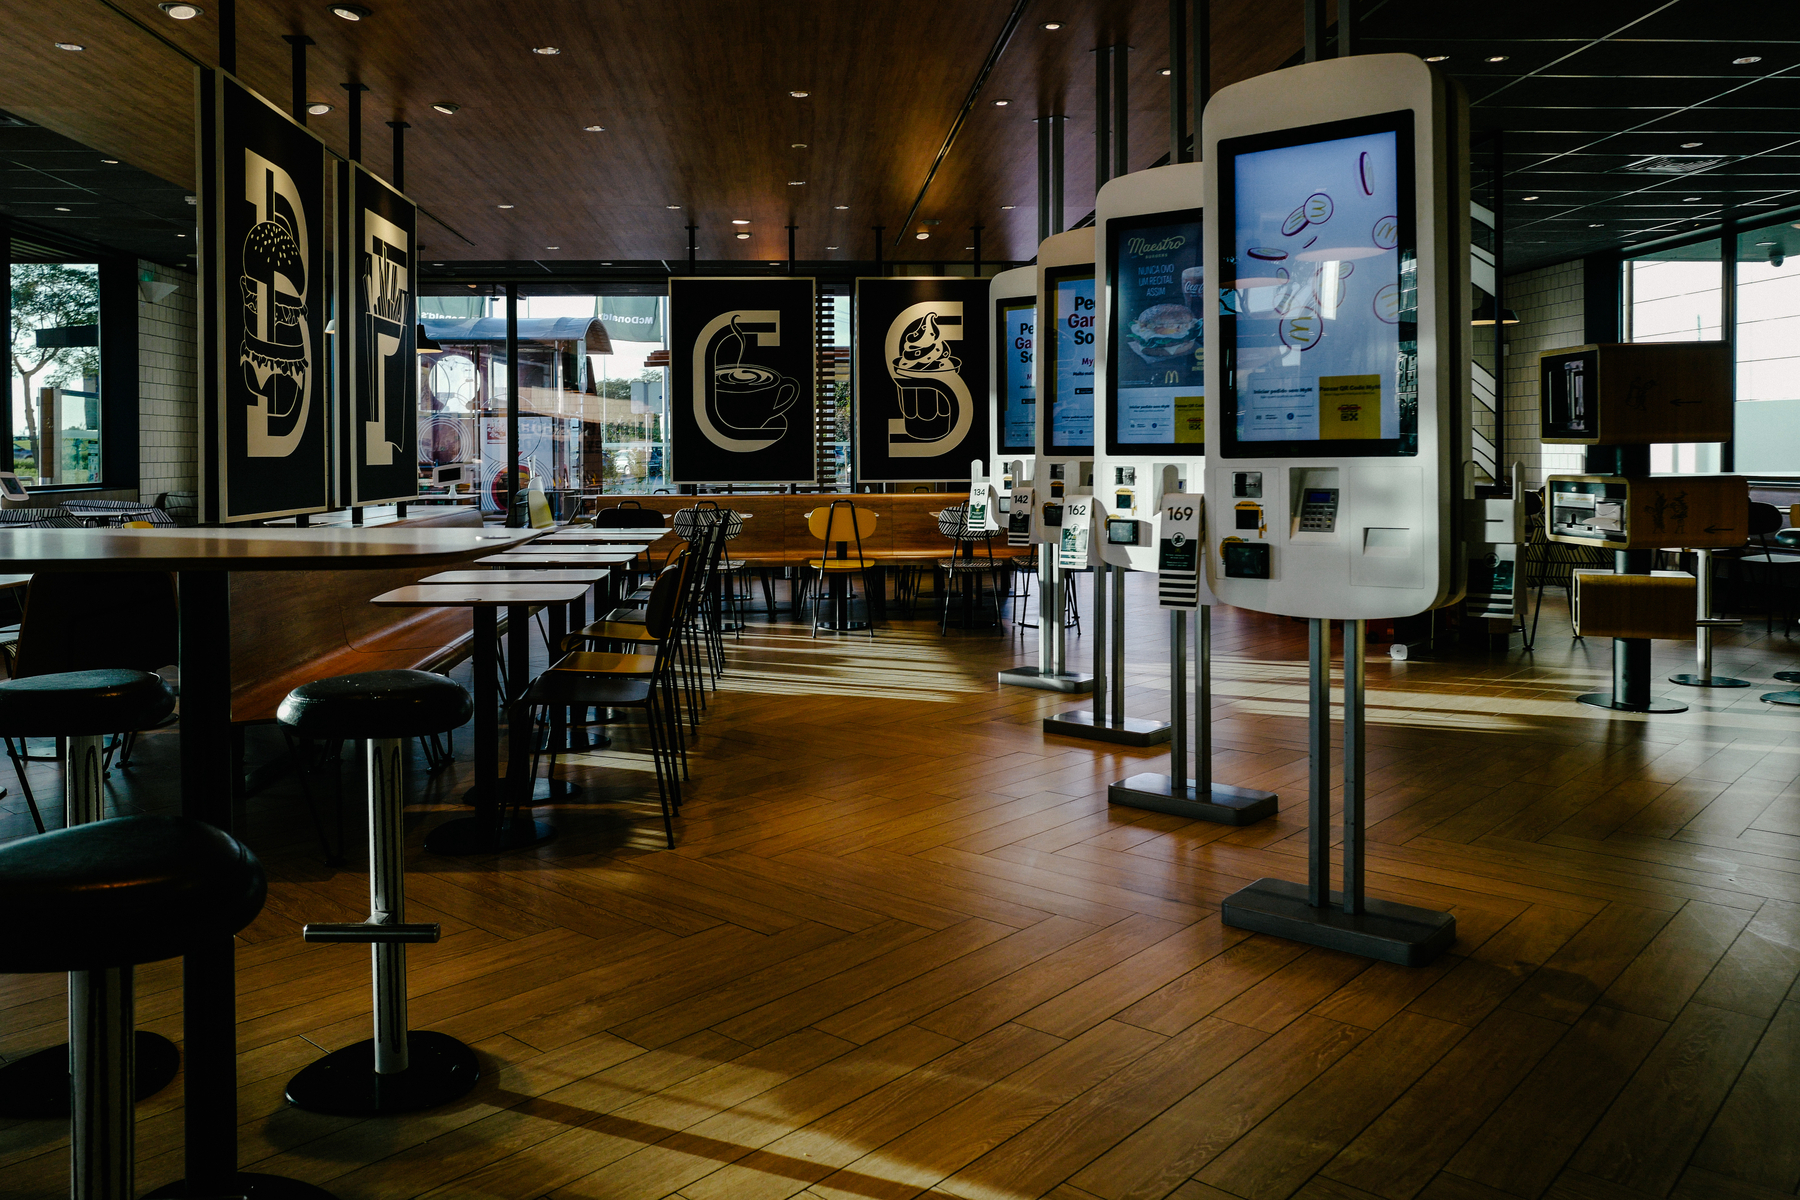 Interior of a modern fast food restaurant with digital ordering kiosks, assorted dining tables and chairs, and large graphic art on the walls.